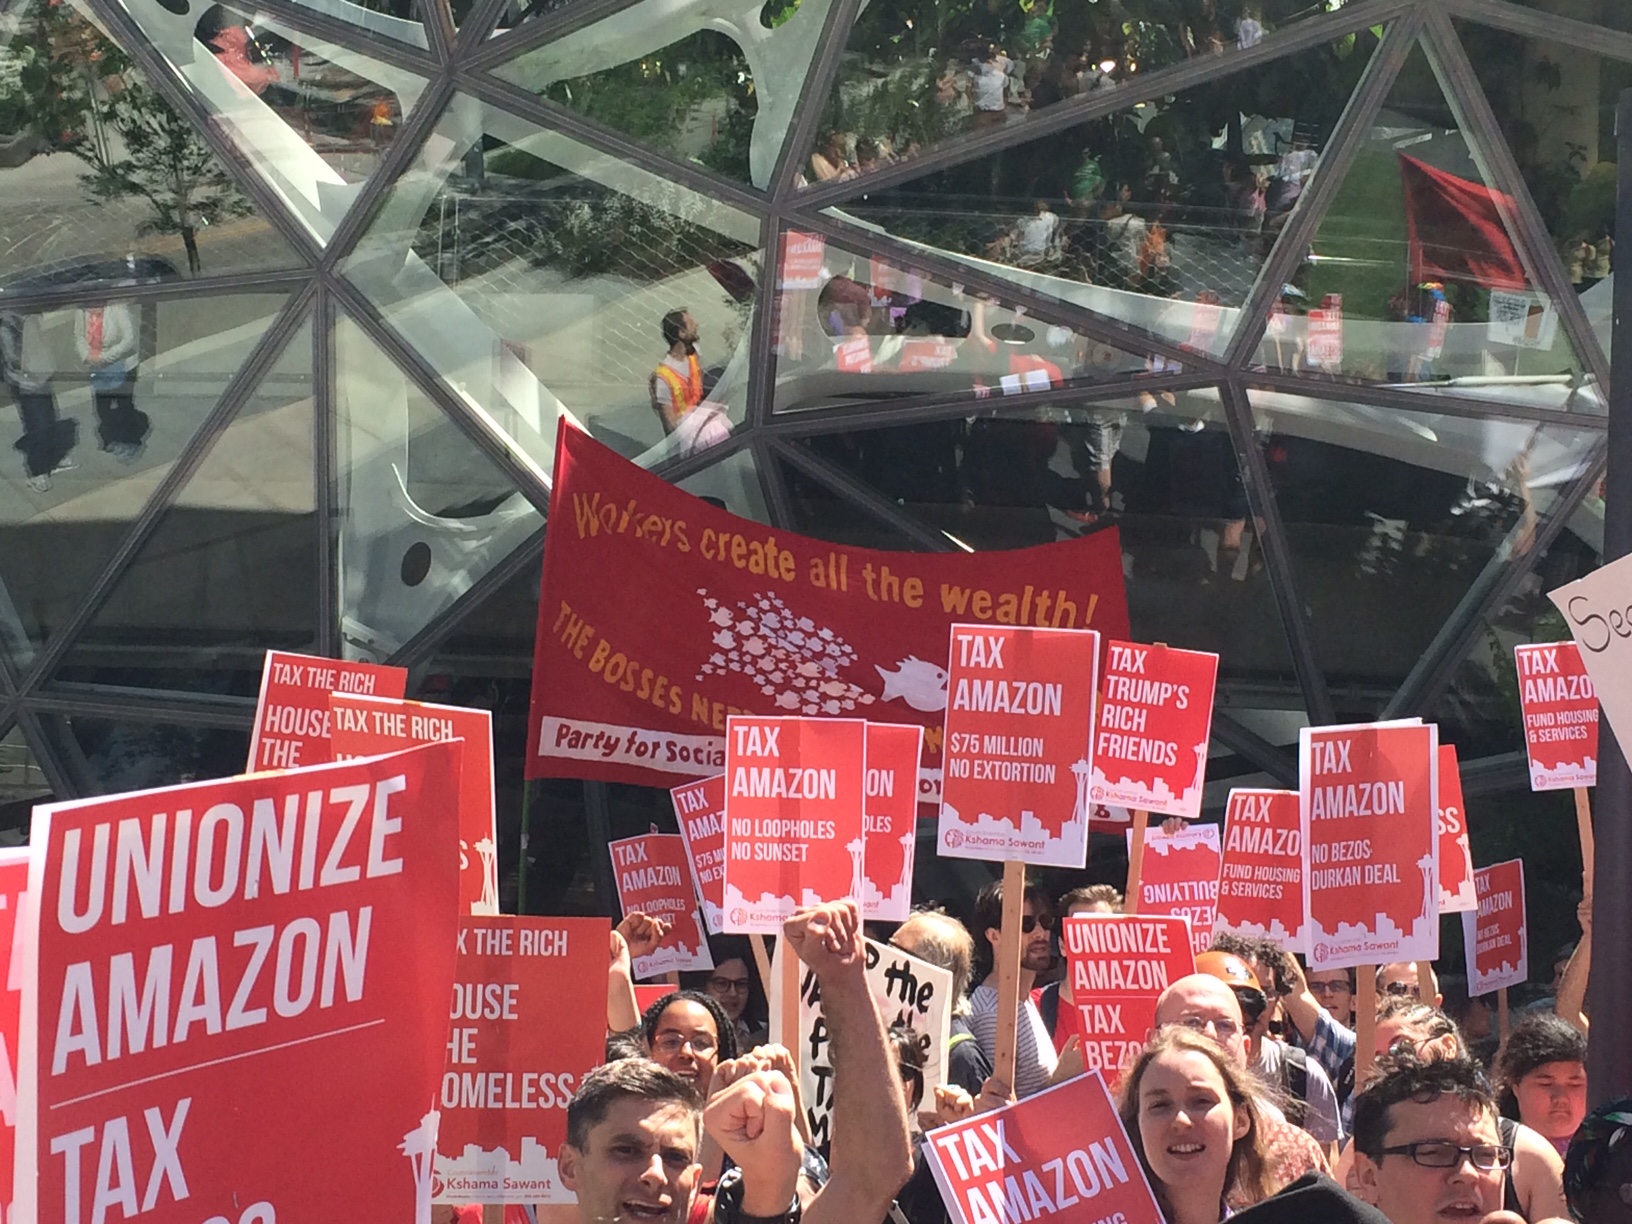 "Tax Amazon" march, Seattle, May 12. Marchers outside Amazon's headquarters in South Lake Union. Liberation Photo.